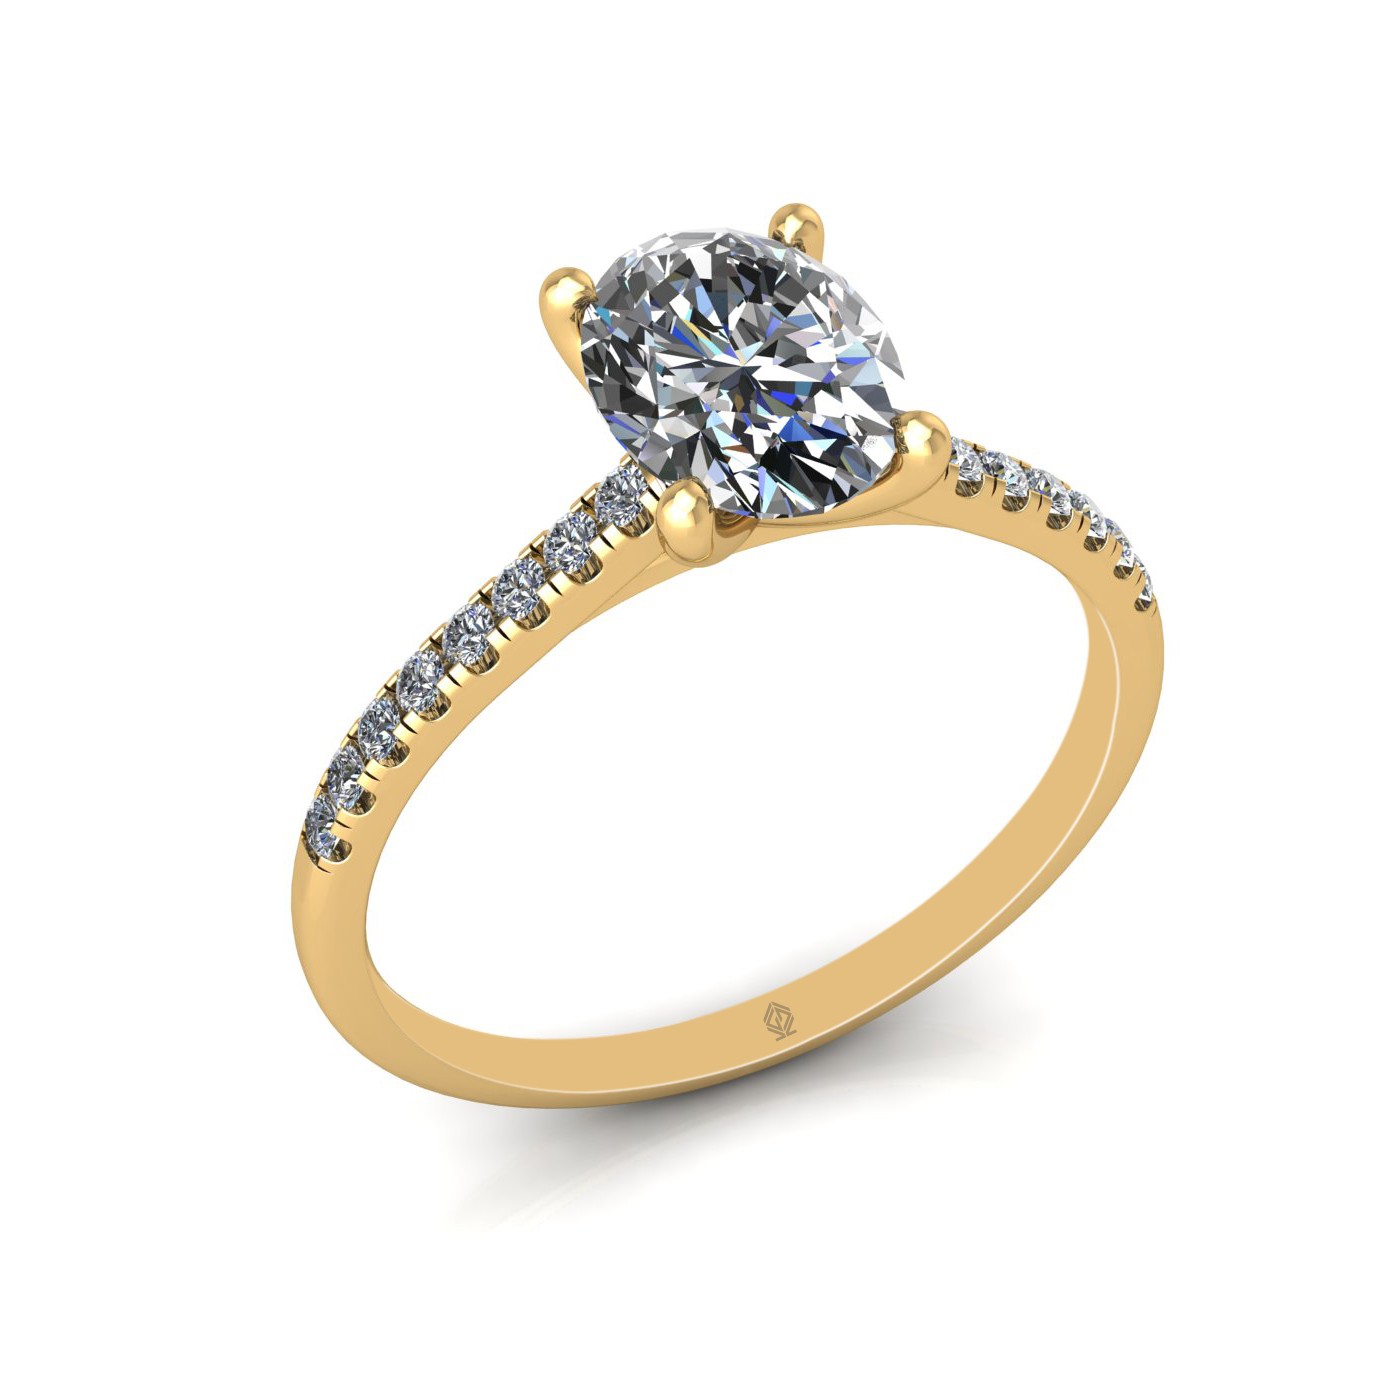 18k yellow gold  1,00 ct 4 prongs oval cut diamond engagement ring with whisper thin pavÉ set band